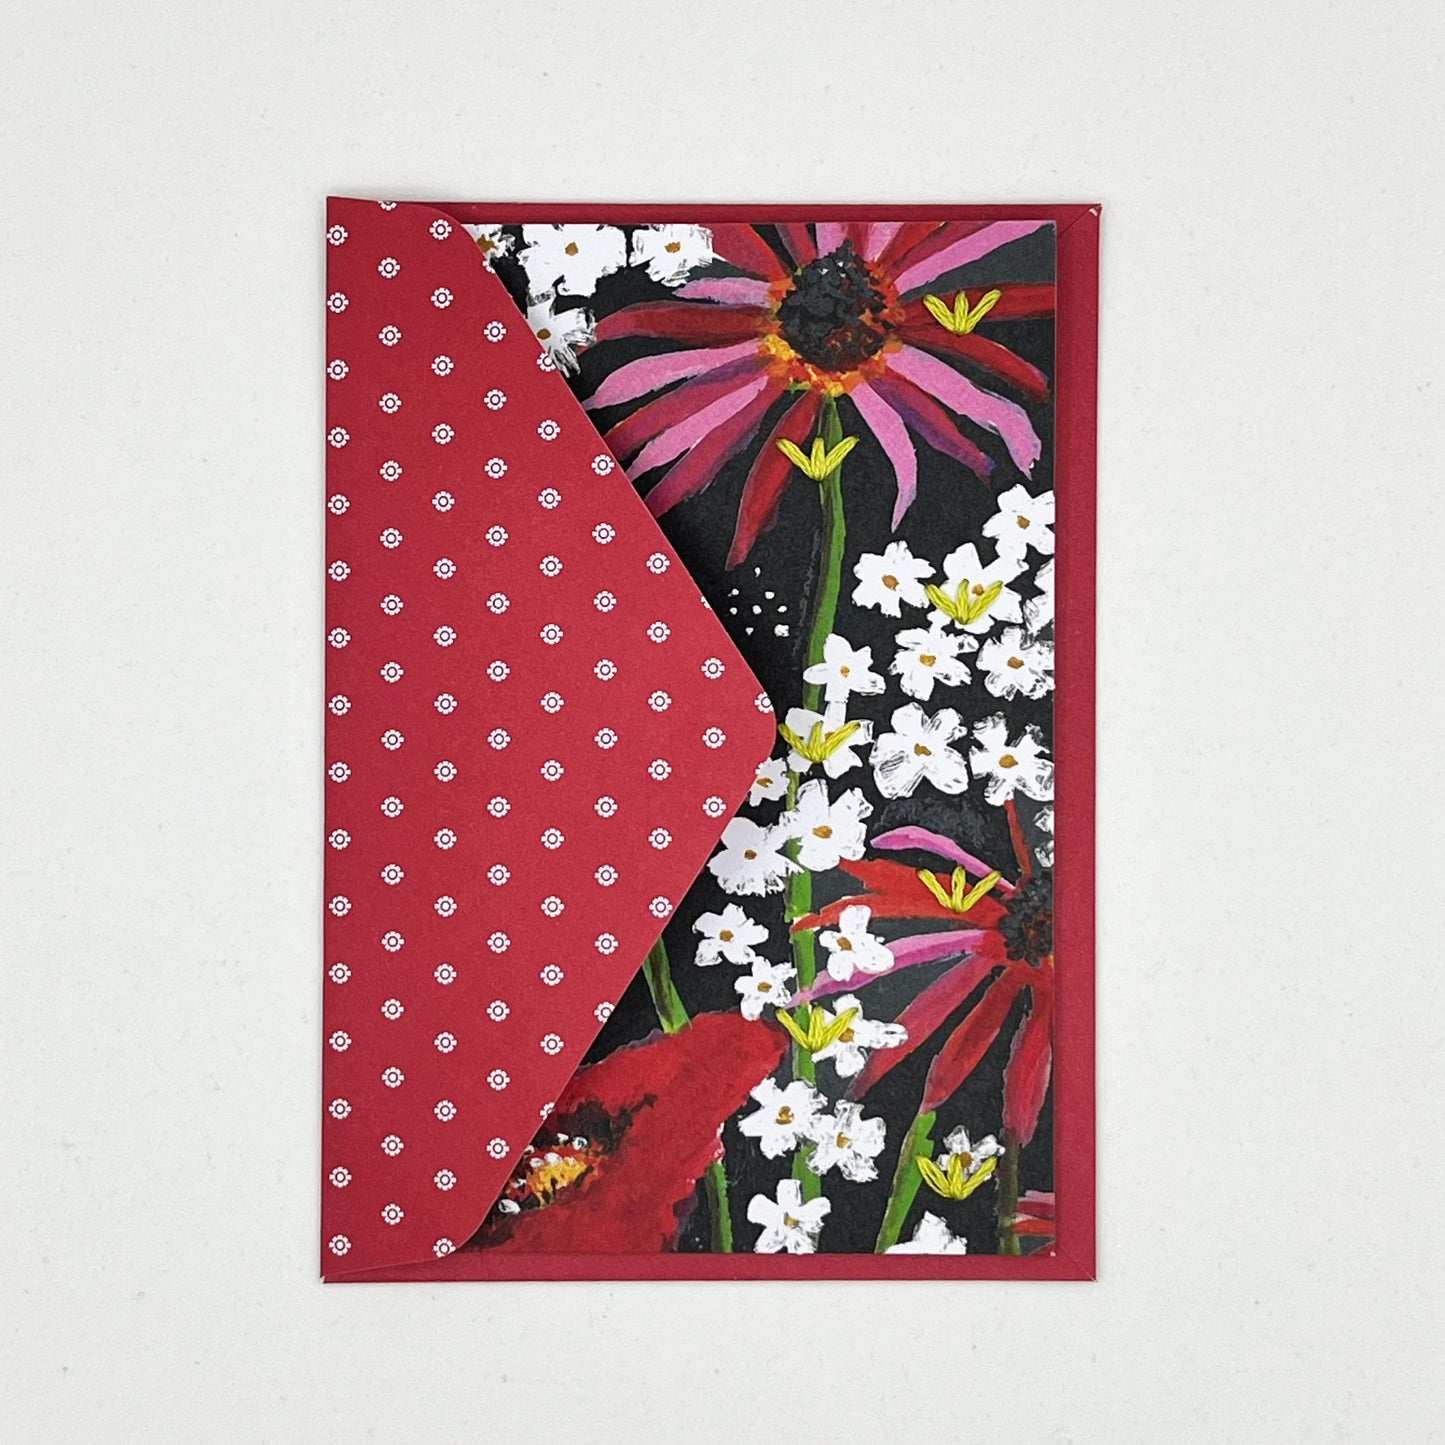 Greeting card tucked into a flap of an envelope. artwork of painted flowers in red pink and white. Chartreuse stitches of sprout shapes in zig zag pattern on right side of card